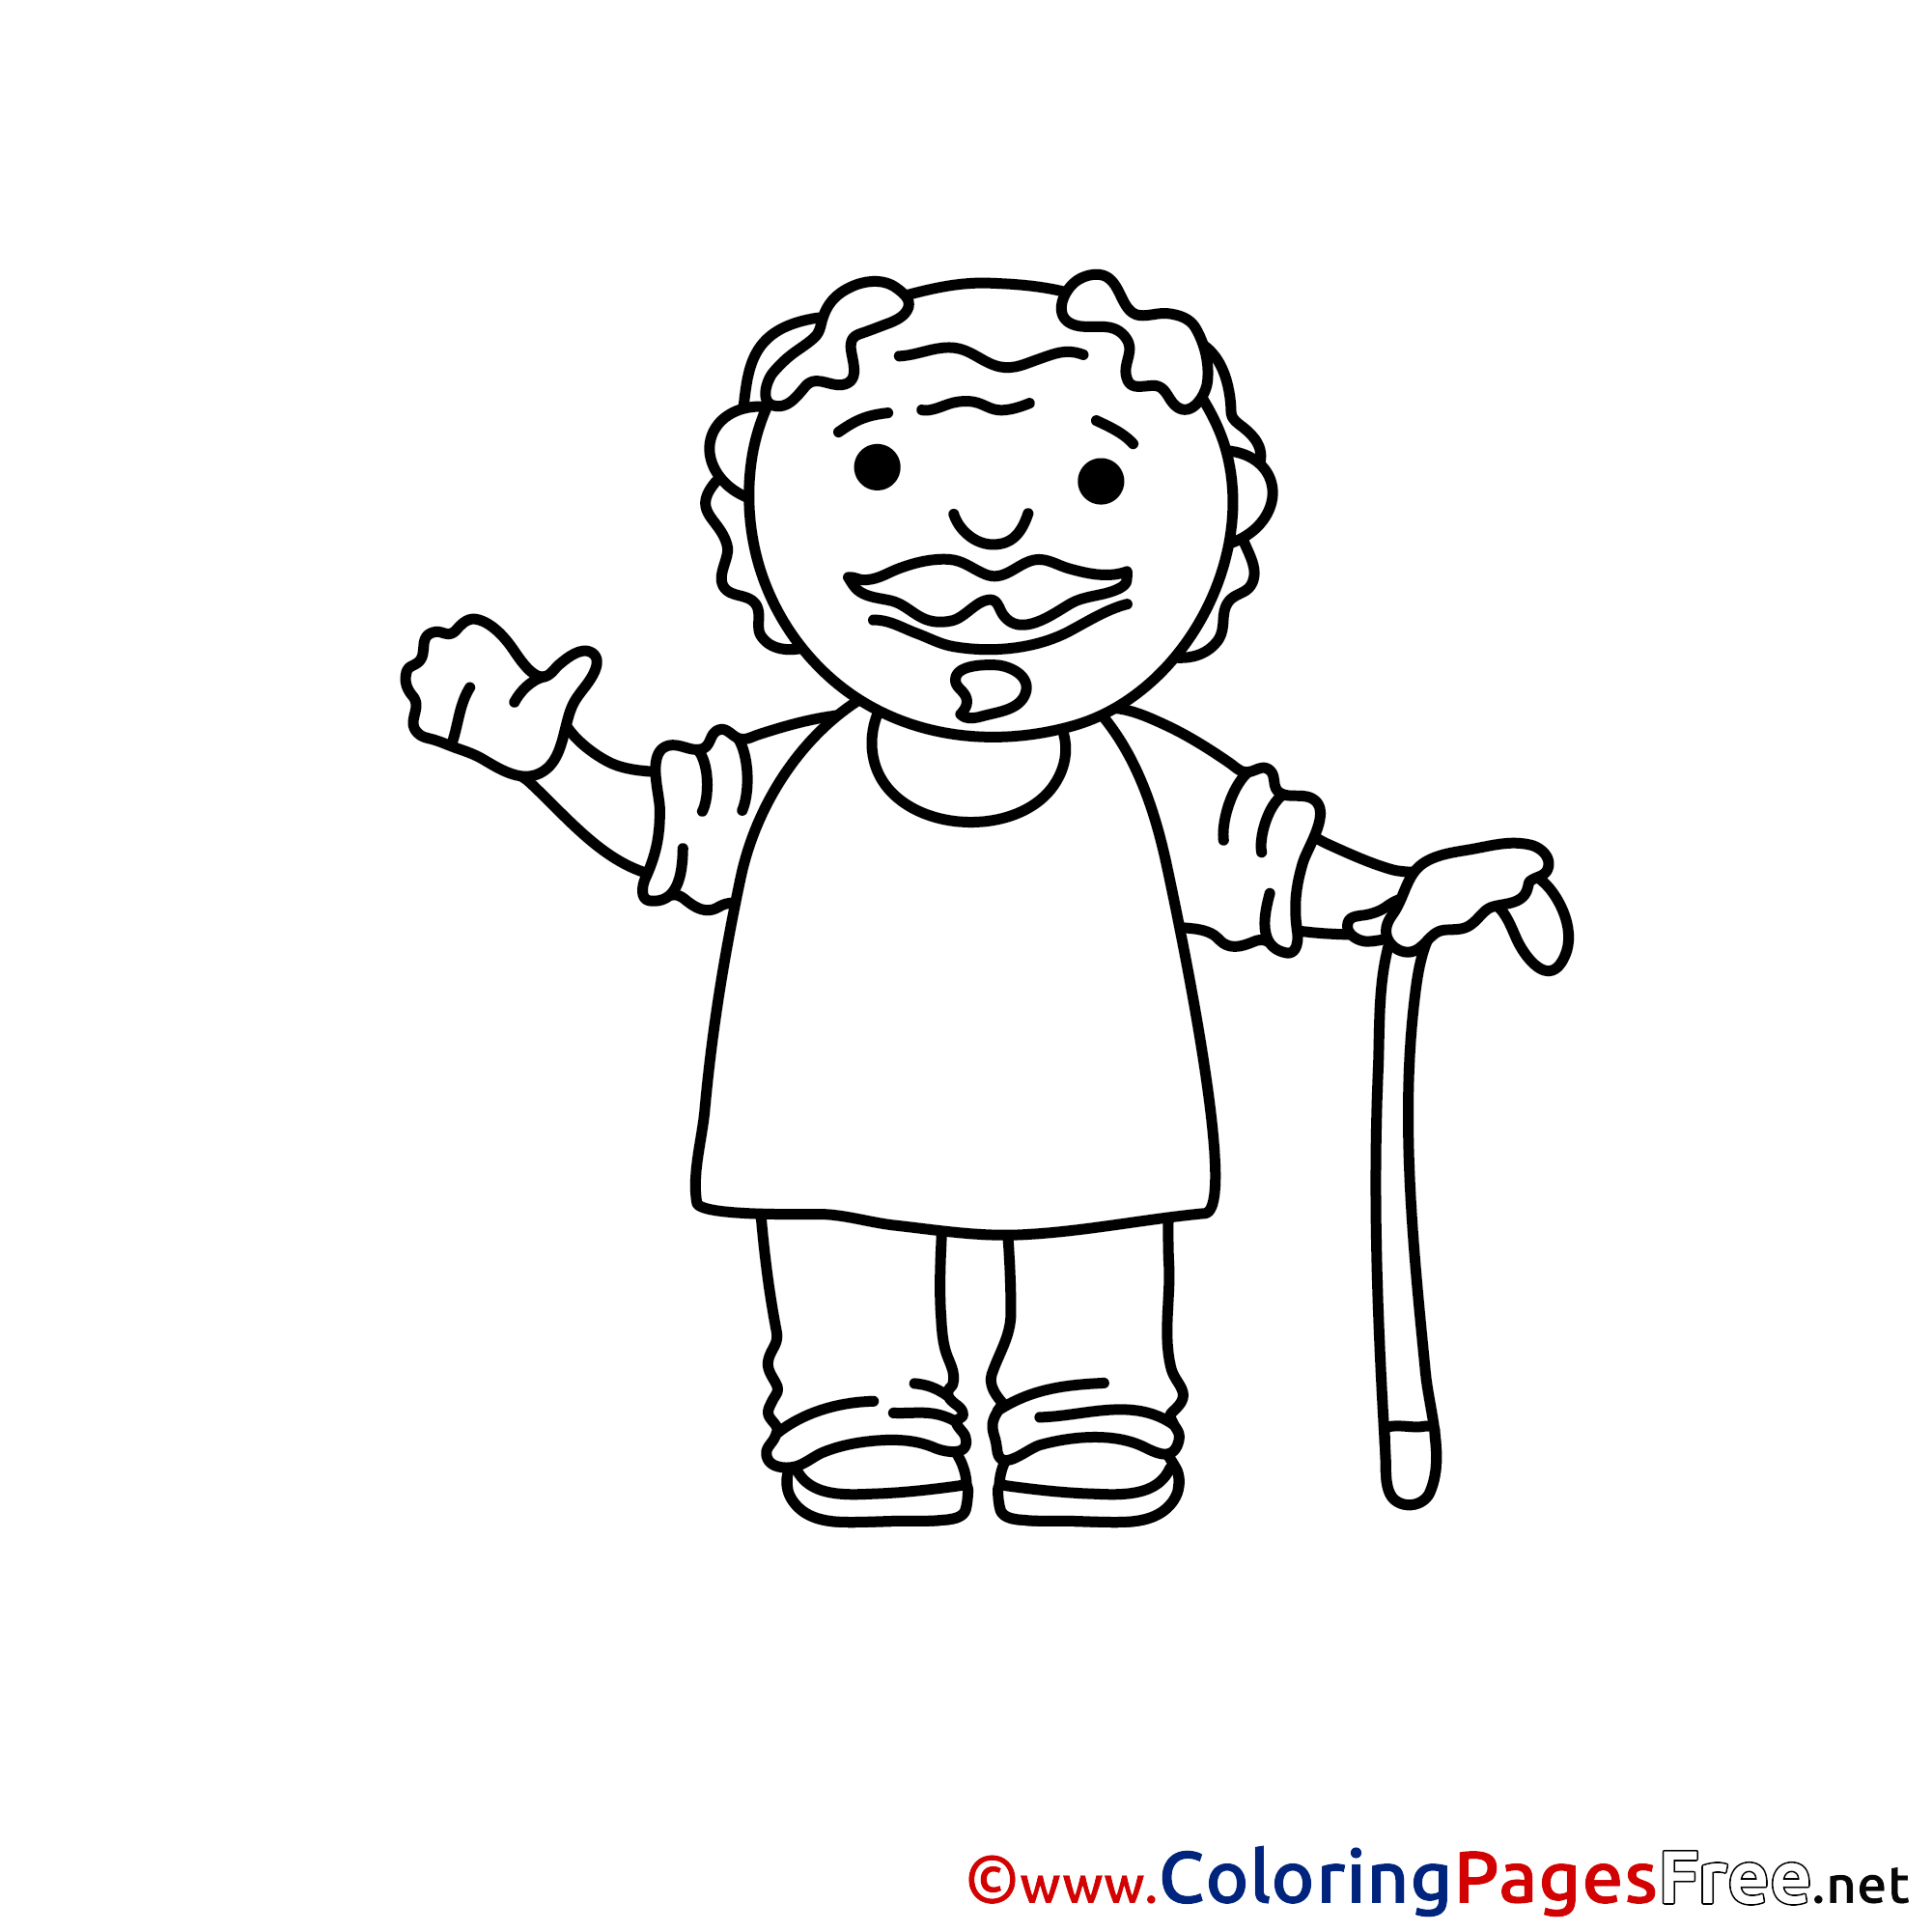 old man coloring page